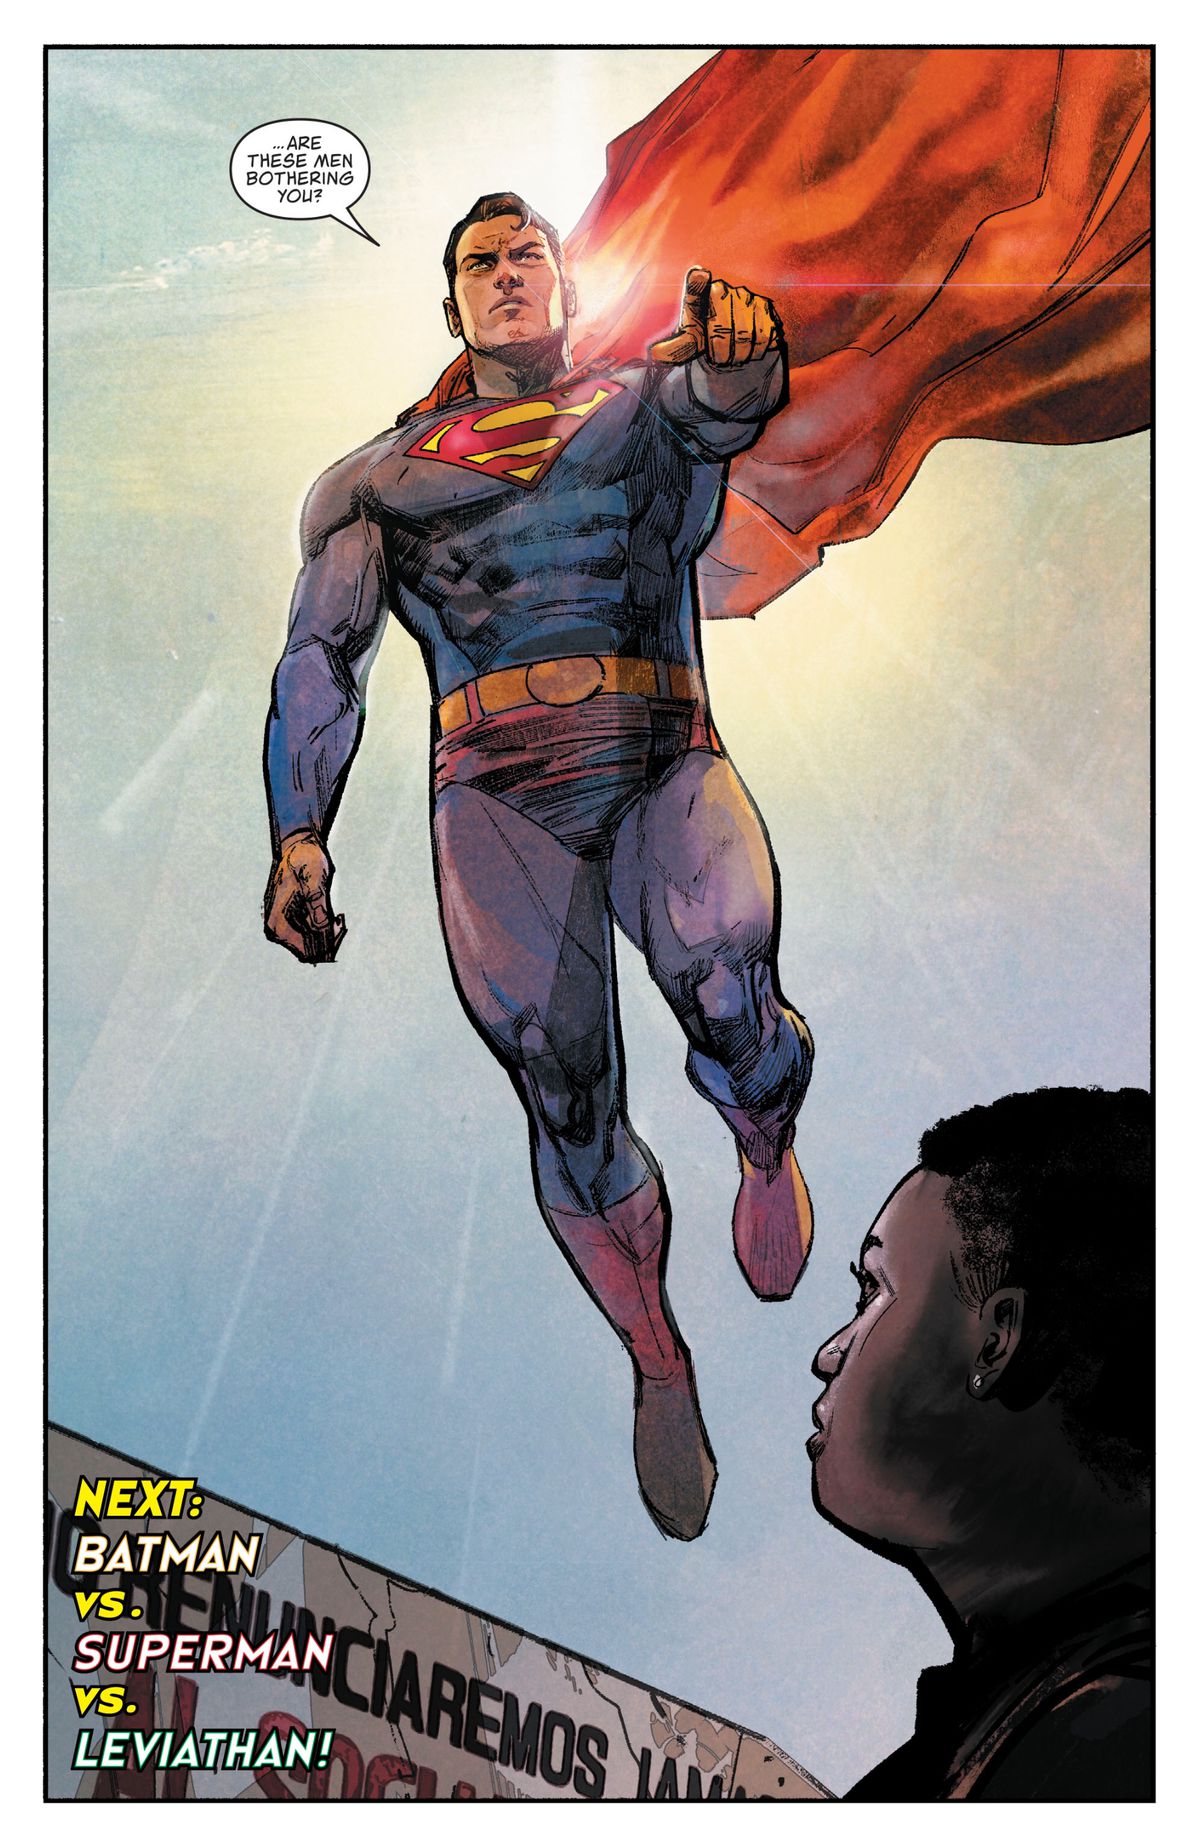 Superman hovers majestically in front of a bright gleam of sunlight as he points at the assembled might of his foes and says “Miss Waller? Are these men bothering you?” to Amanda “The Wall” Waller, in Event Leviathan #3, DC Comics (2019). 